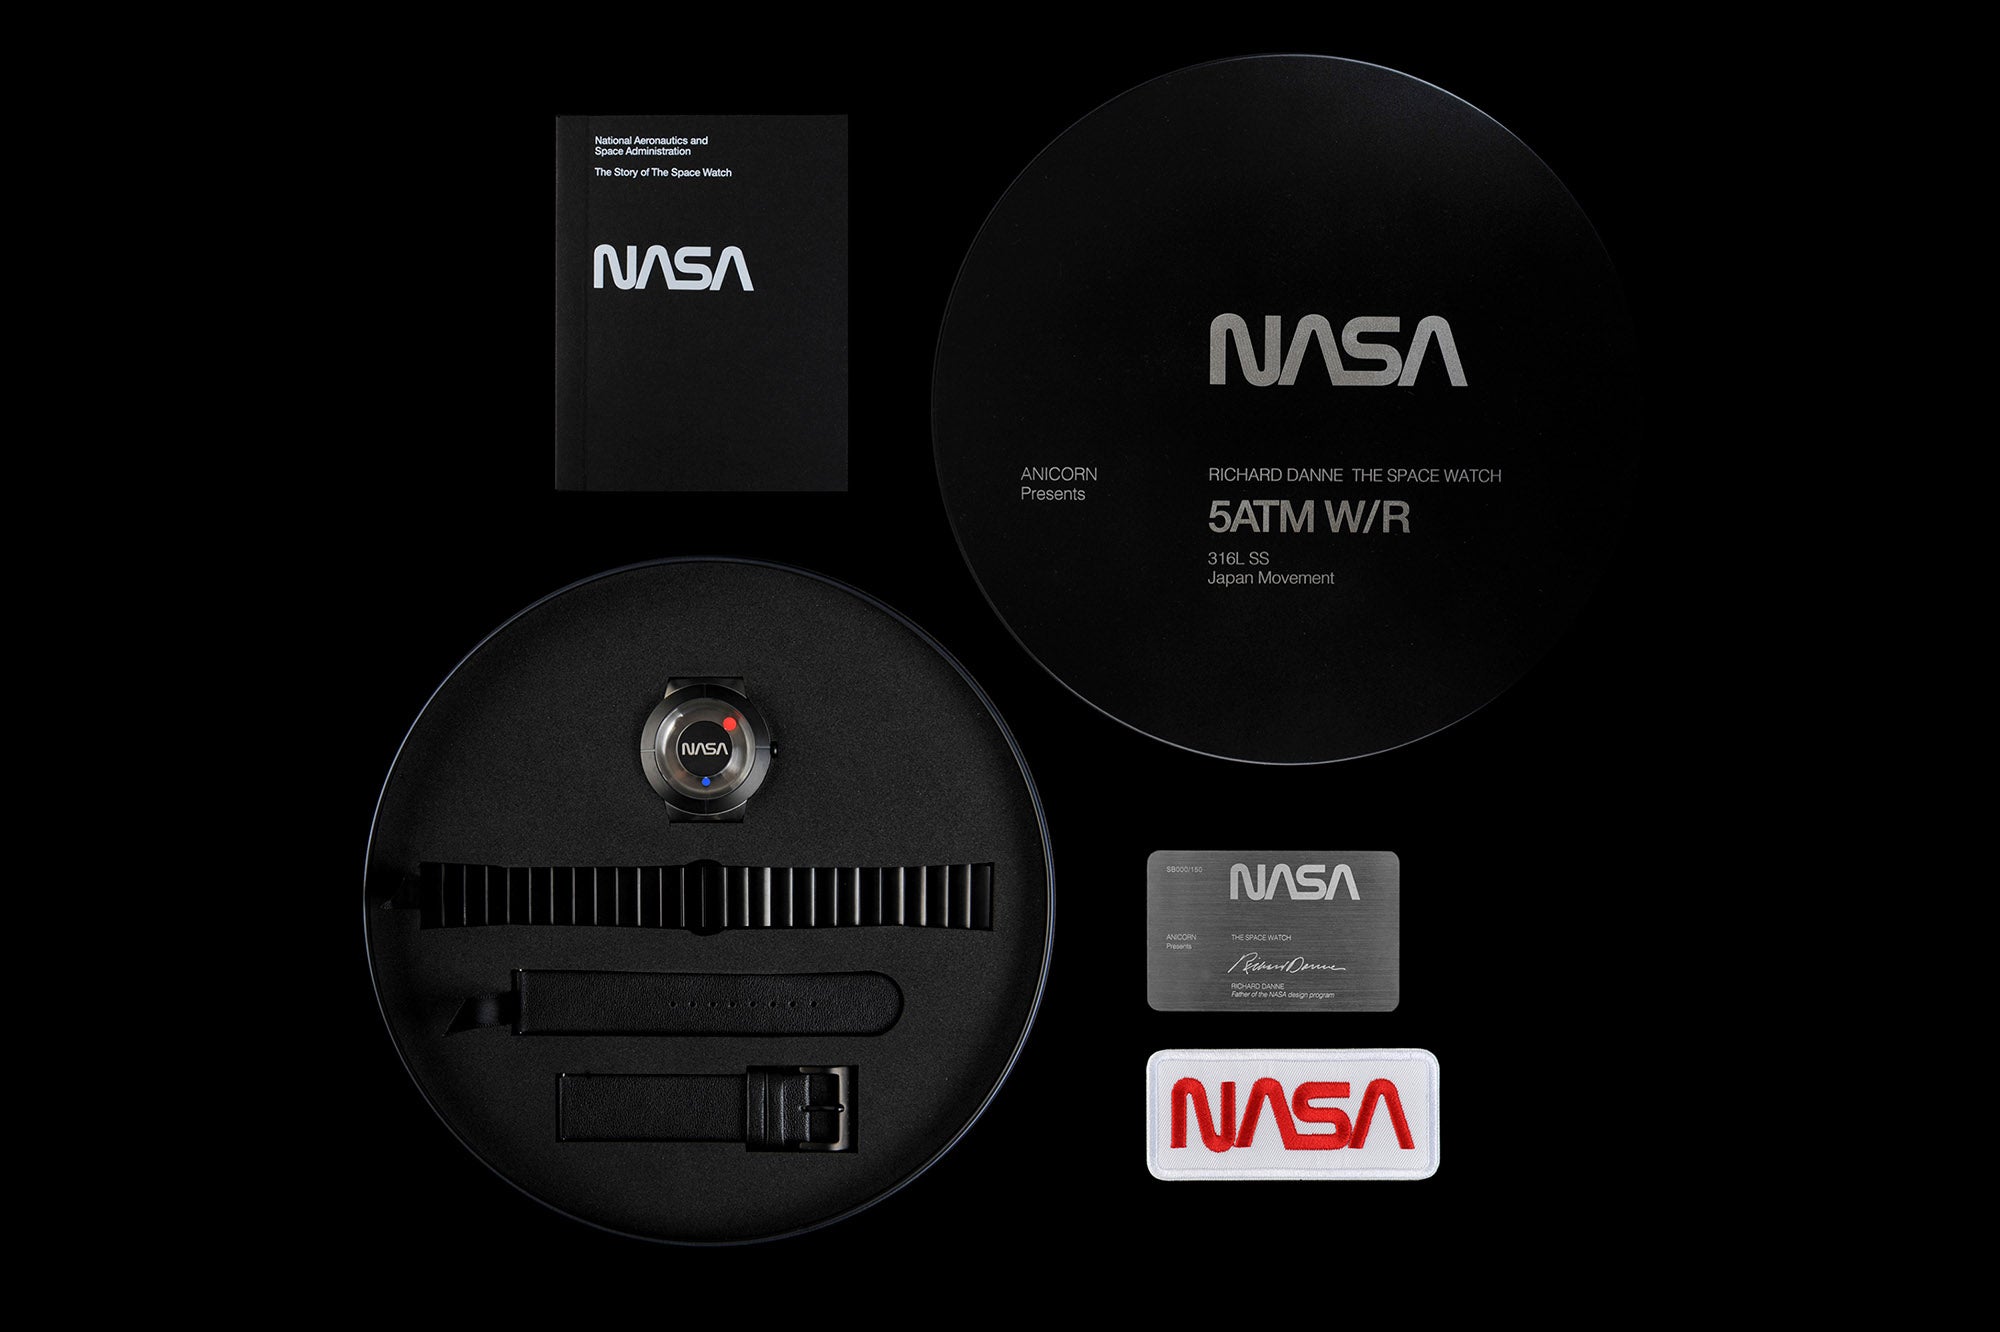 A box-set package of the space watch, inspired by Space itself, “Father of the NASA Design Program” Richard Danne designs his One and Only Space Watch, as homage to his long and fruitful relationship with the NASA family.